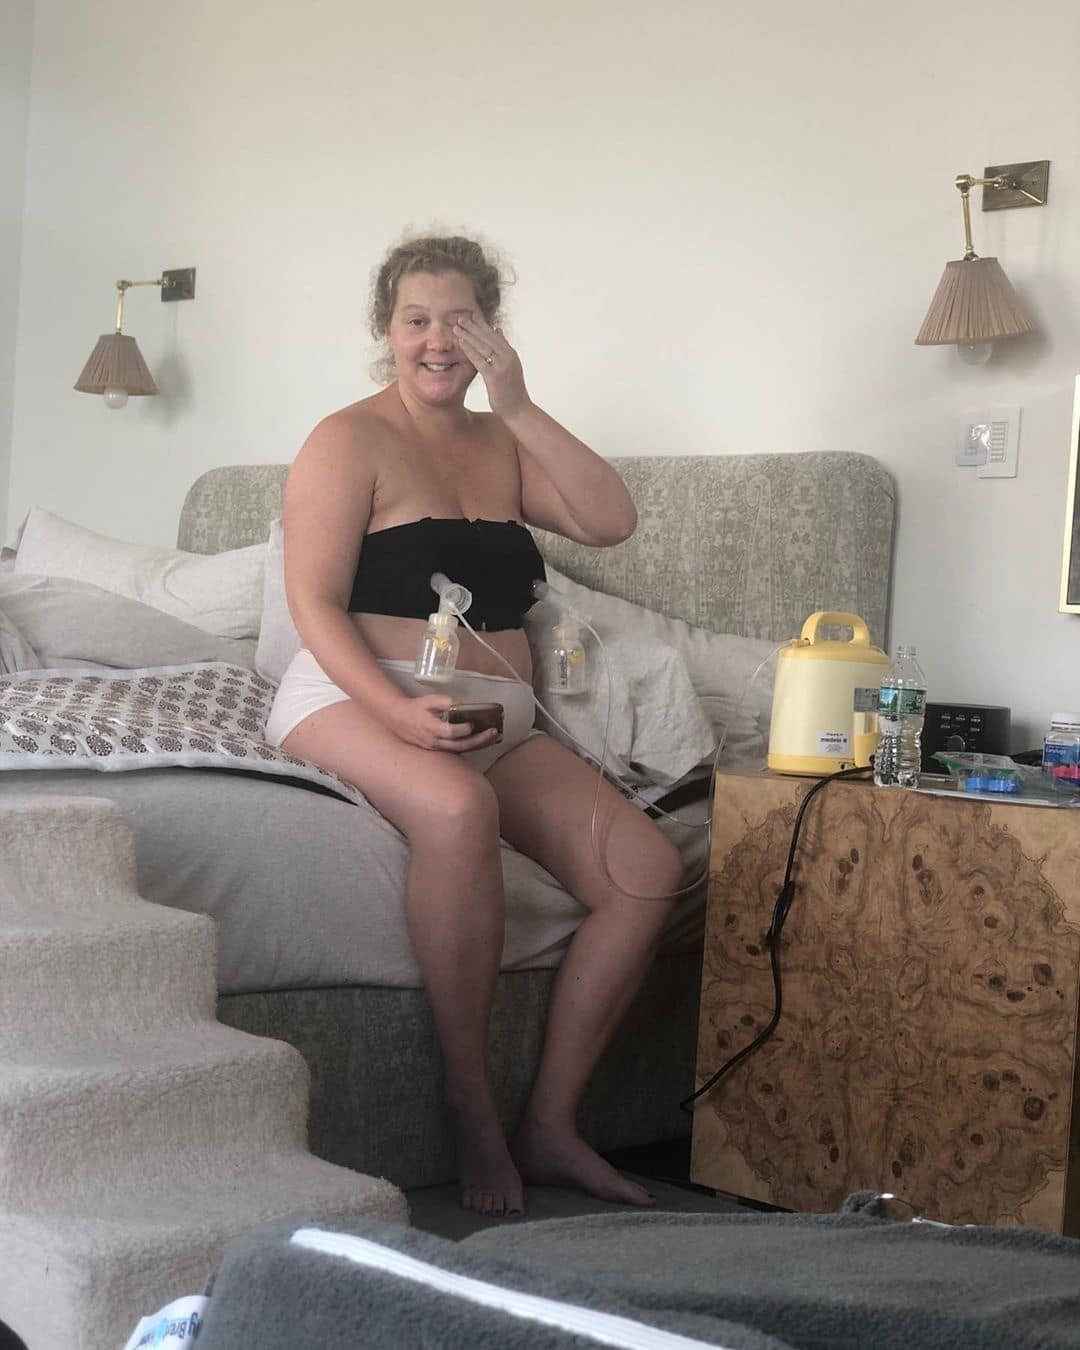 Amy Schumer pumping on the edge of her bed